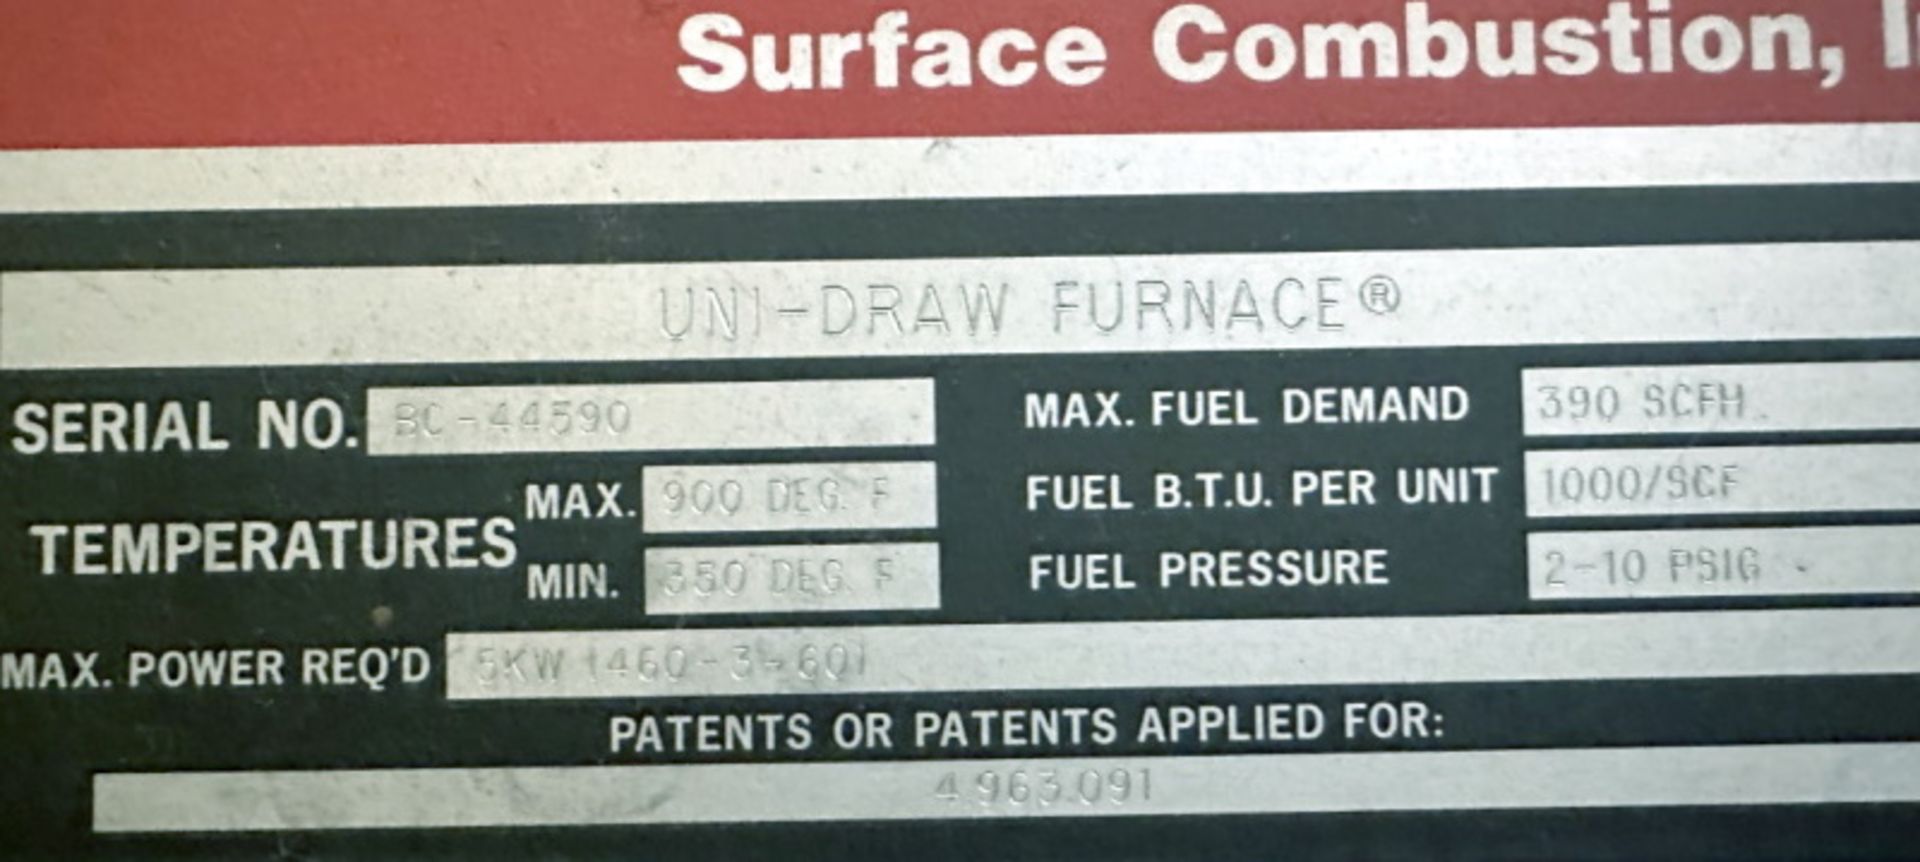 Surface Combustion Gas-Fired Uni-Draw Temper Furnace - Image 9 of 9